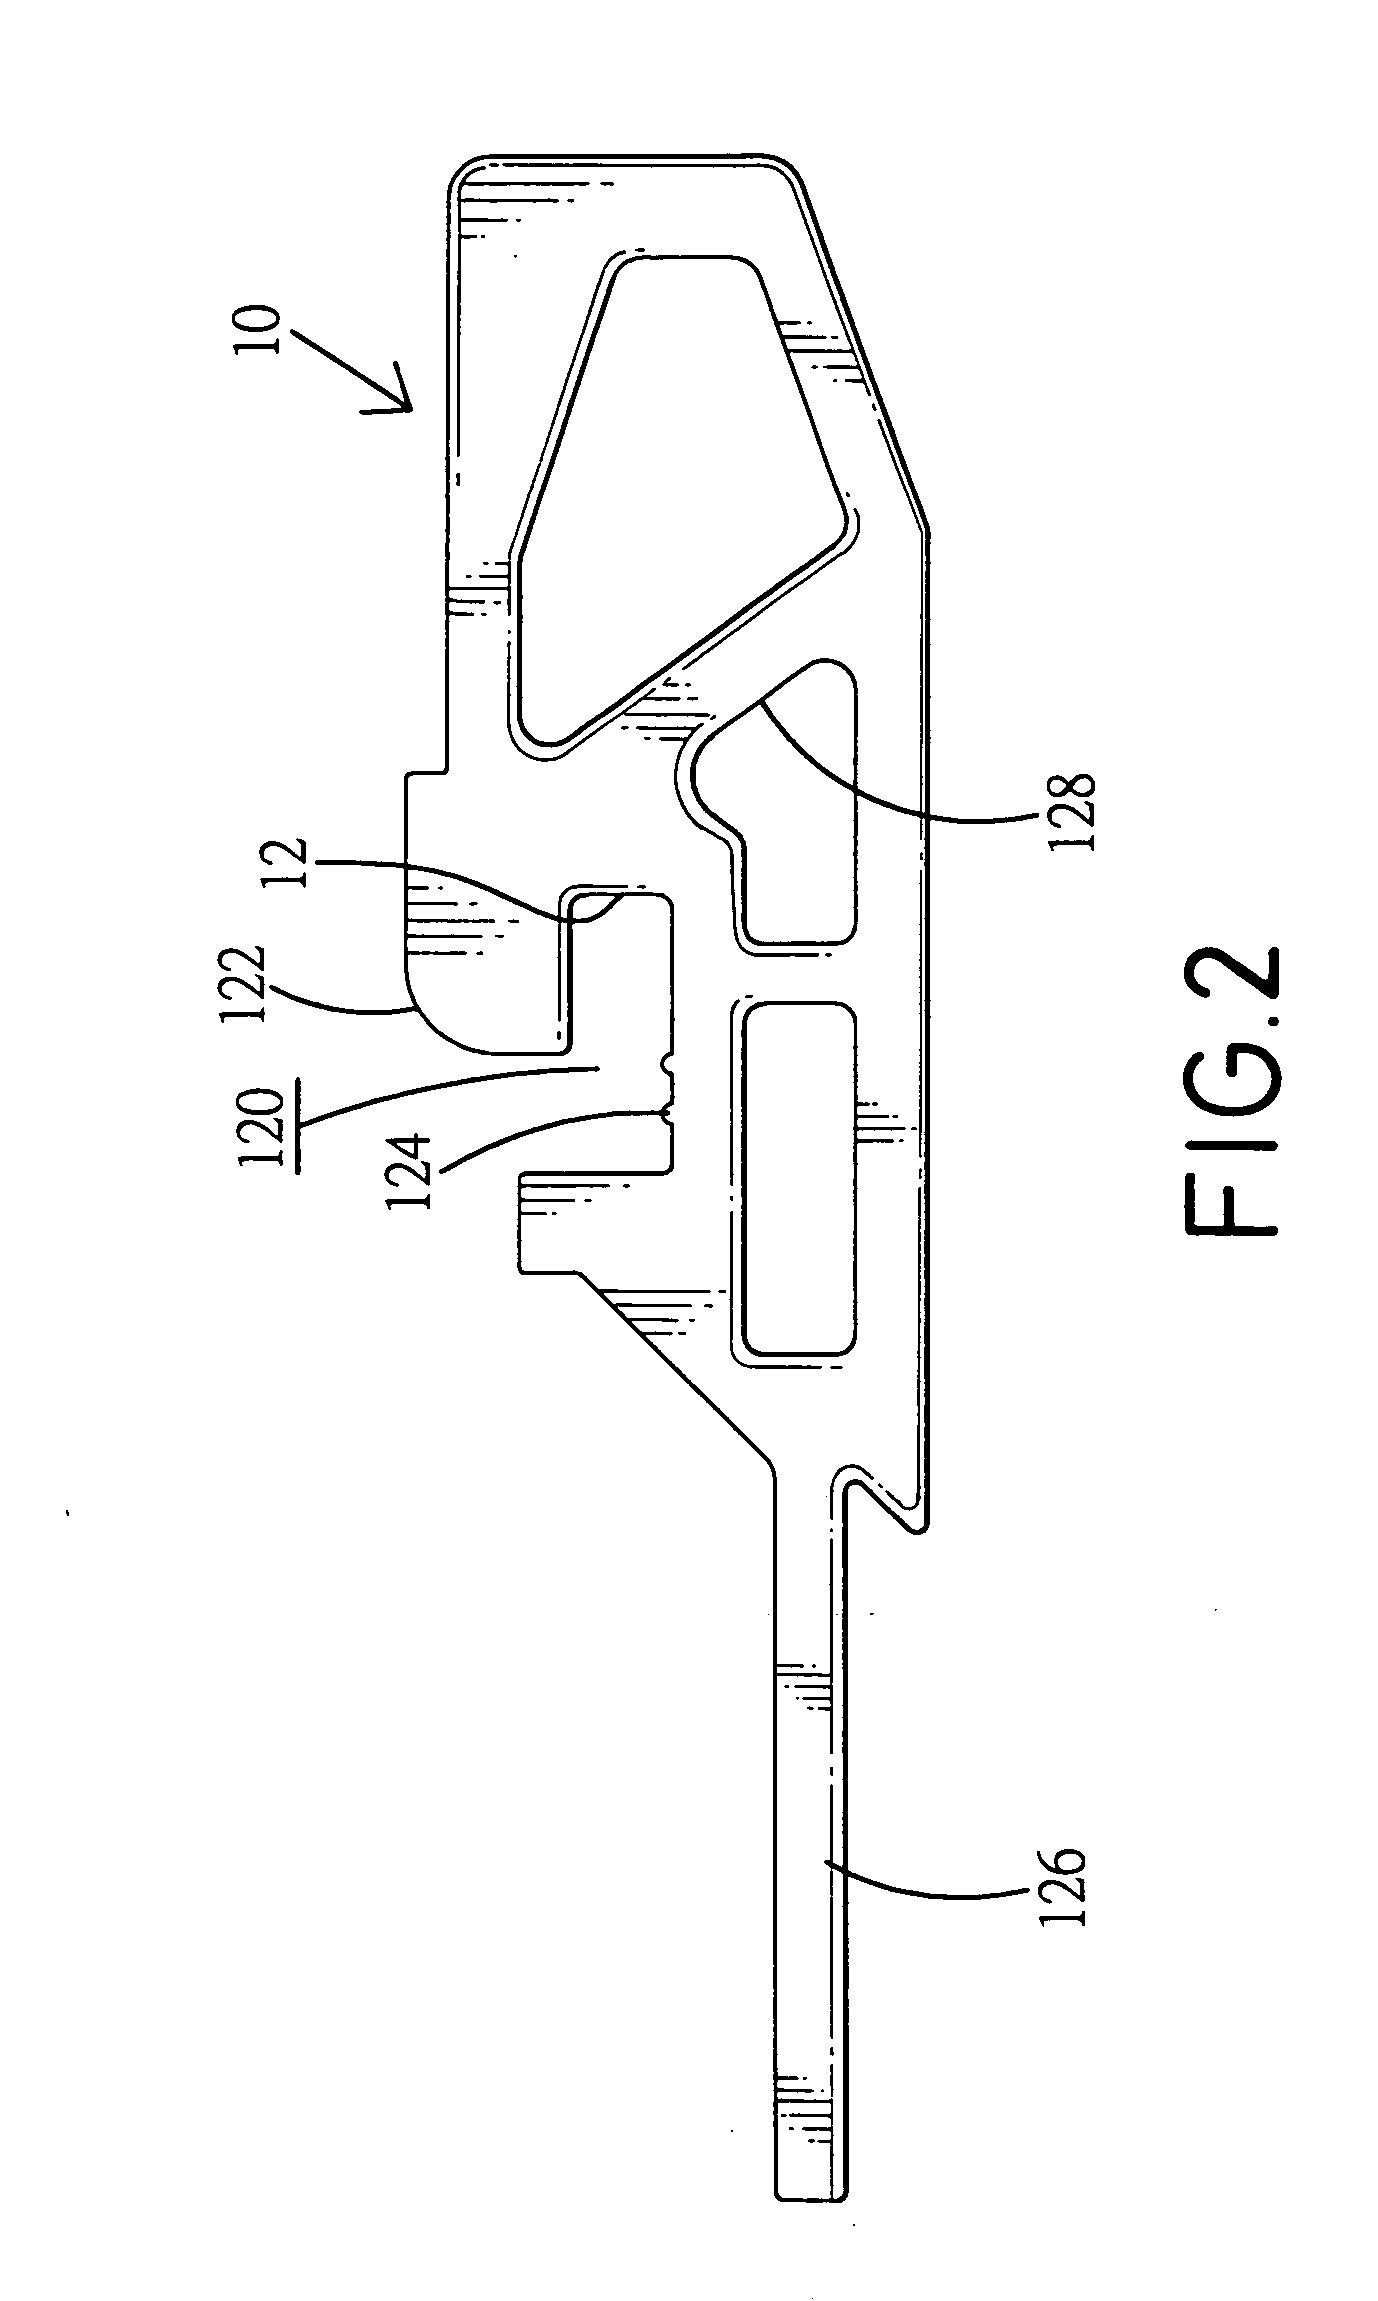 Connection device for use with a blast-resistant container